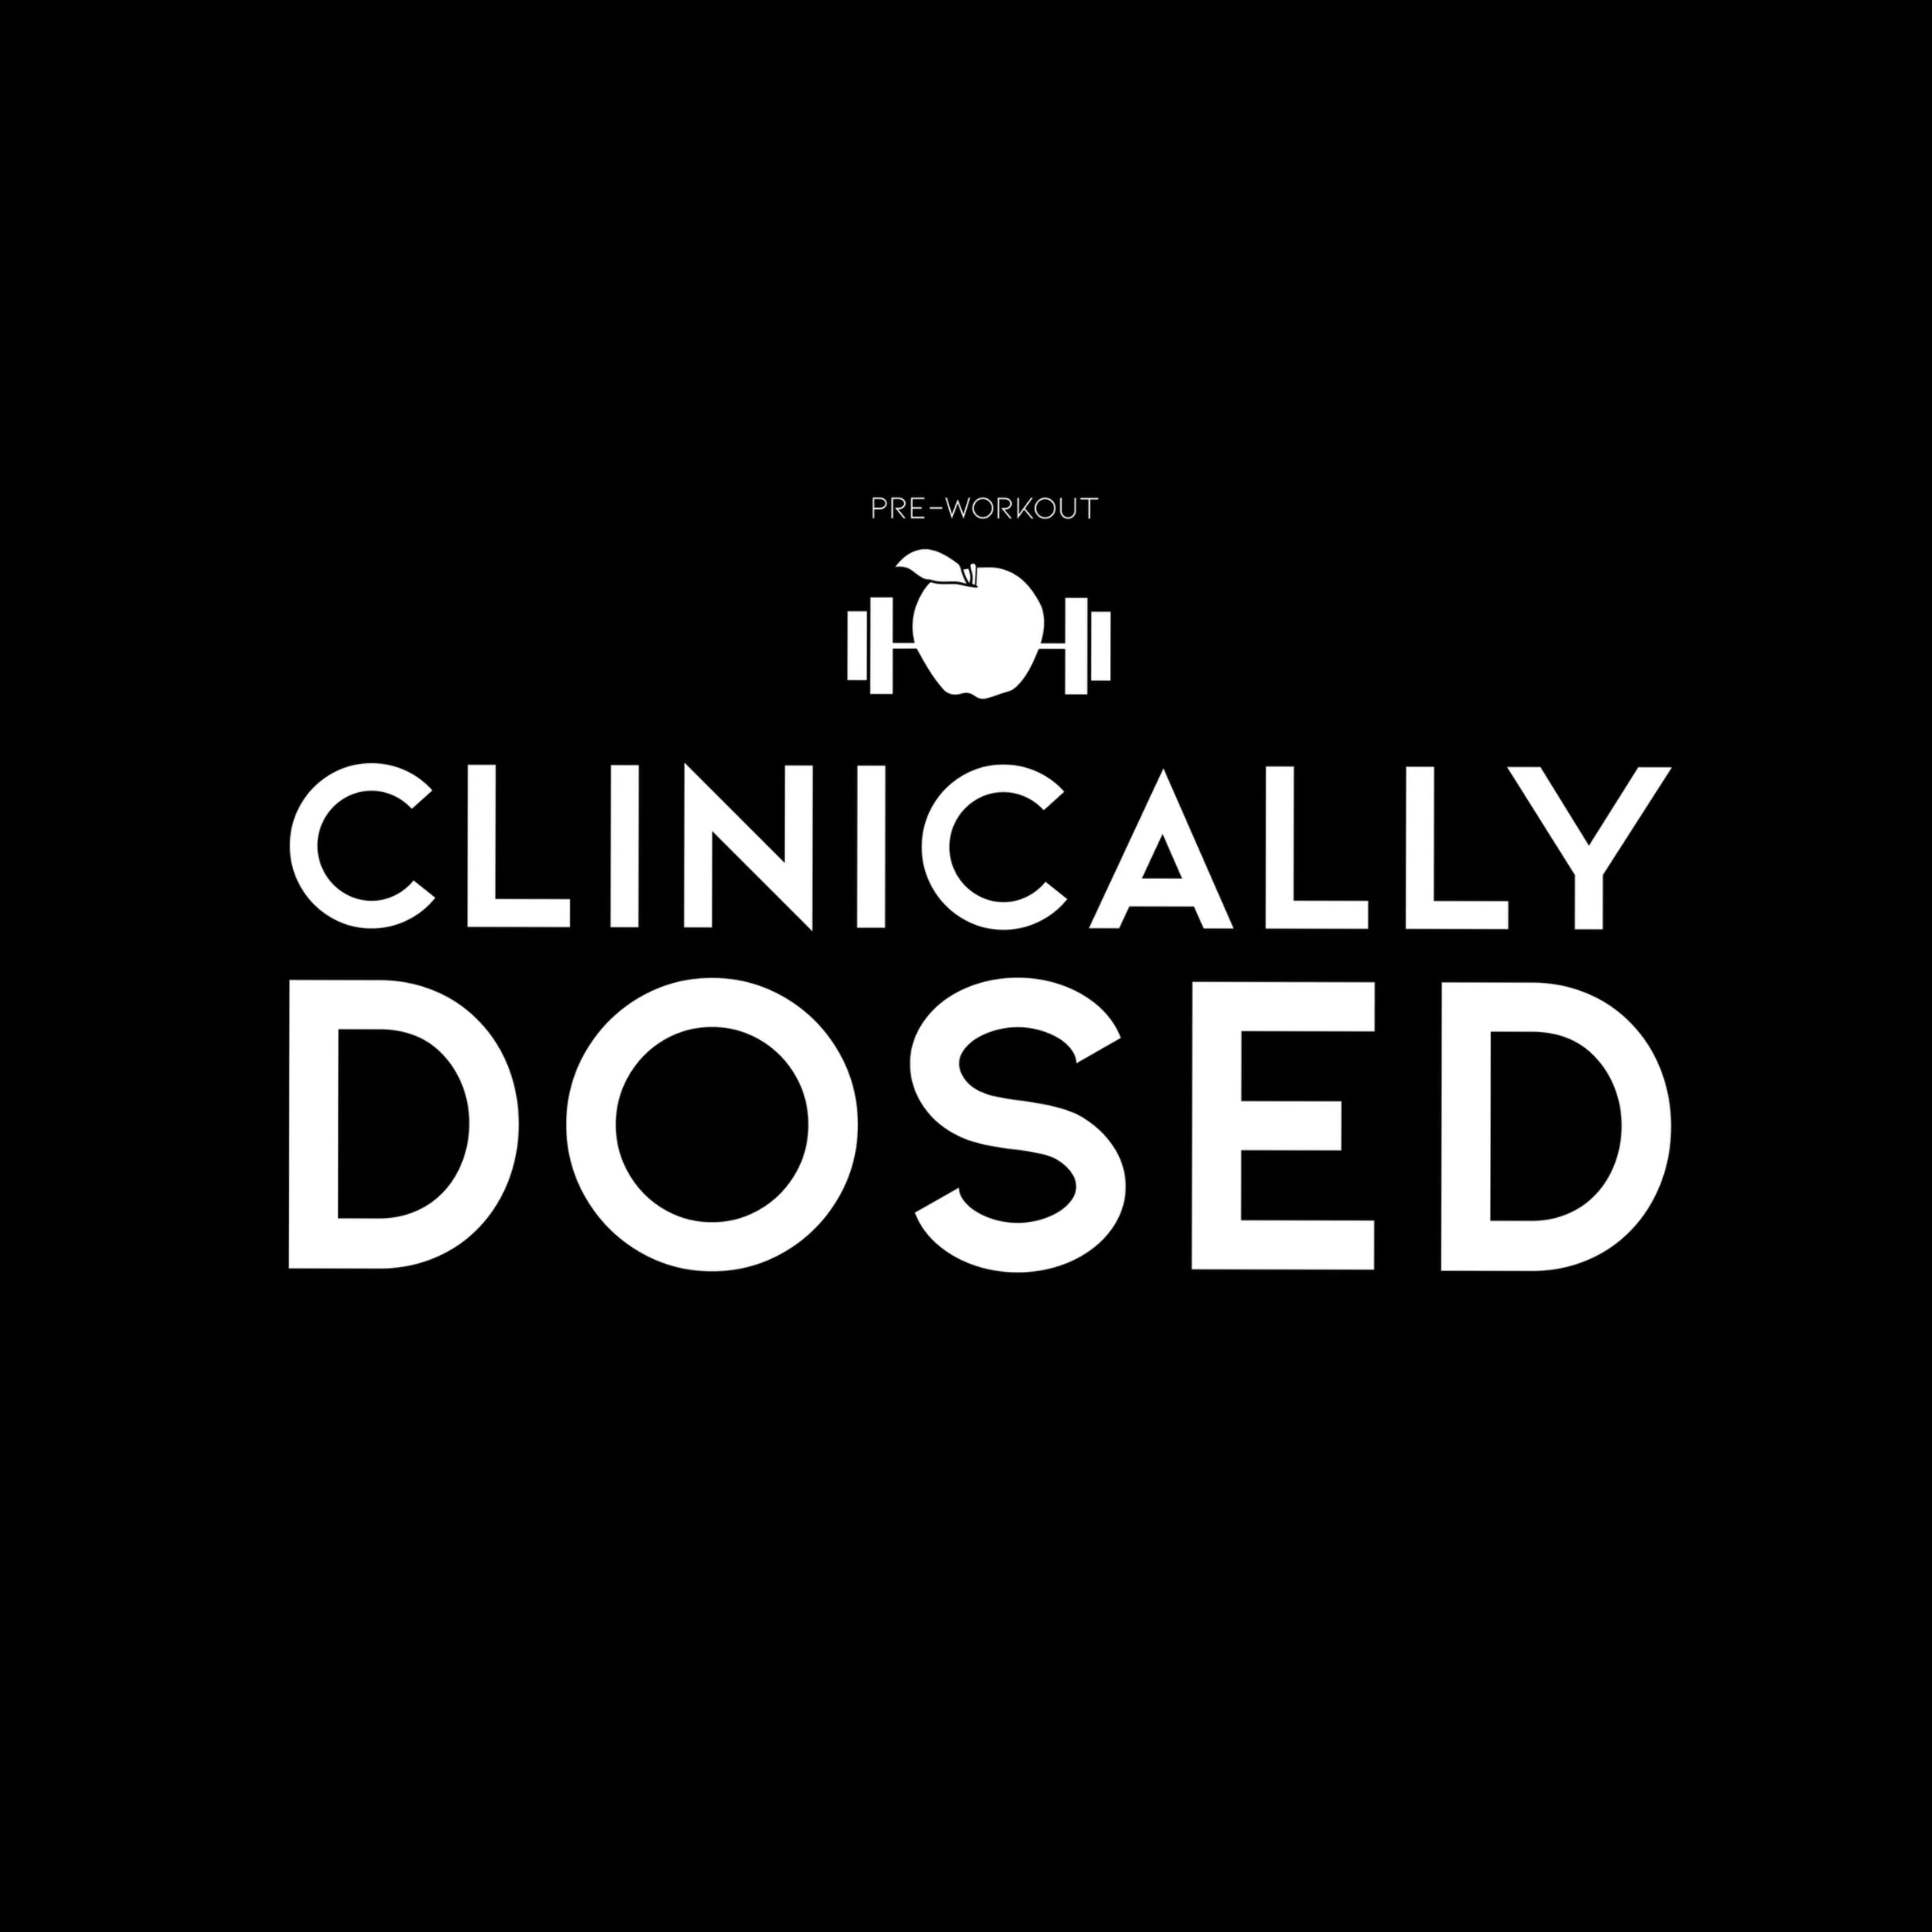 Clinically dosed